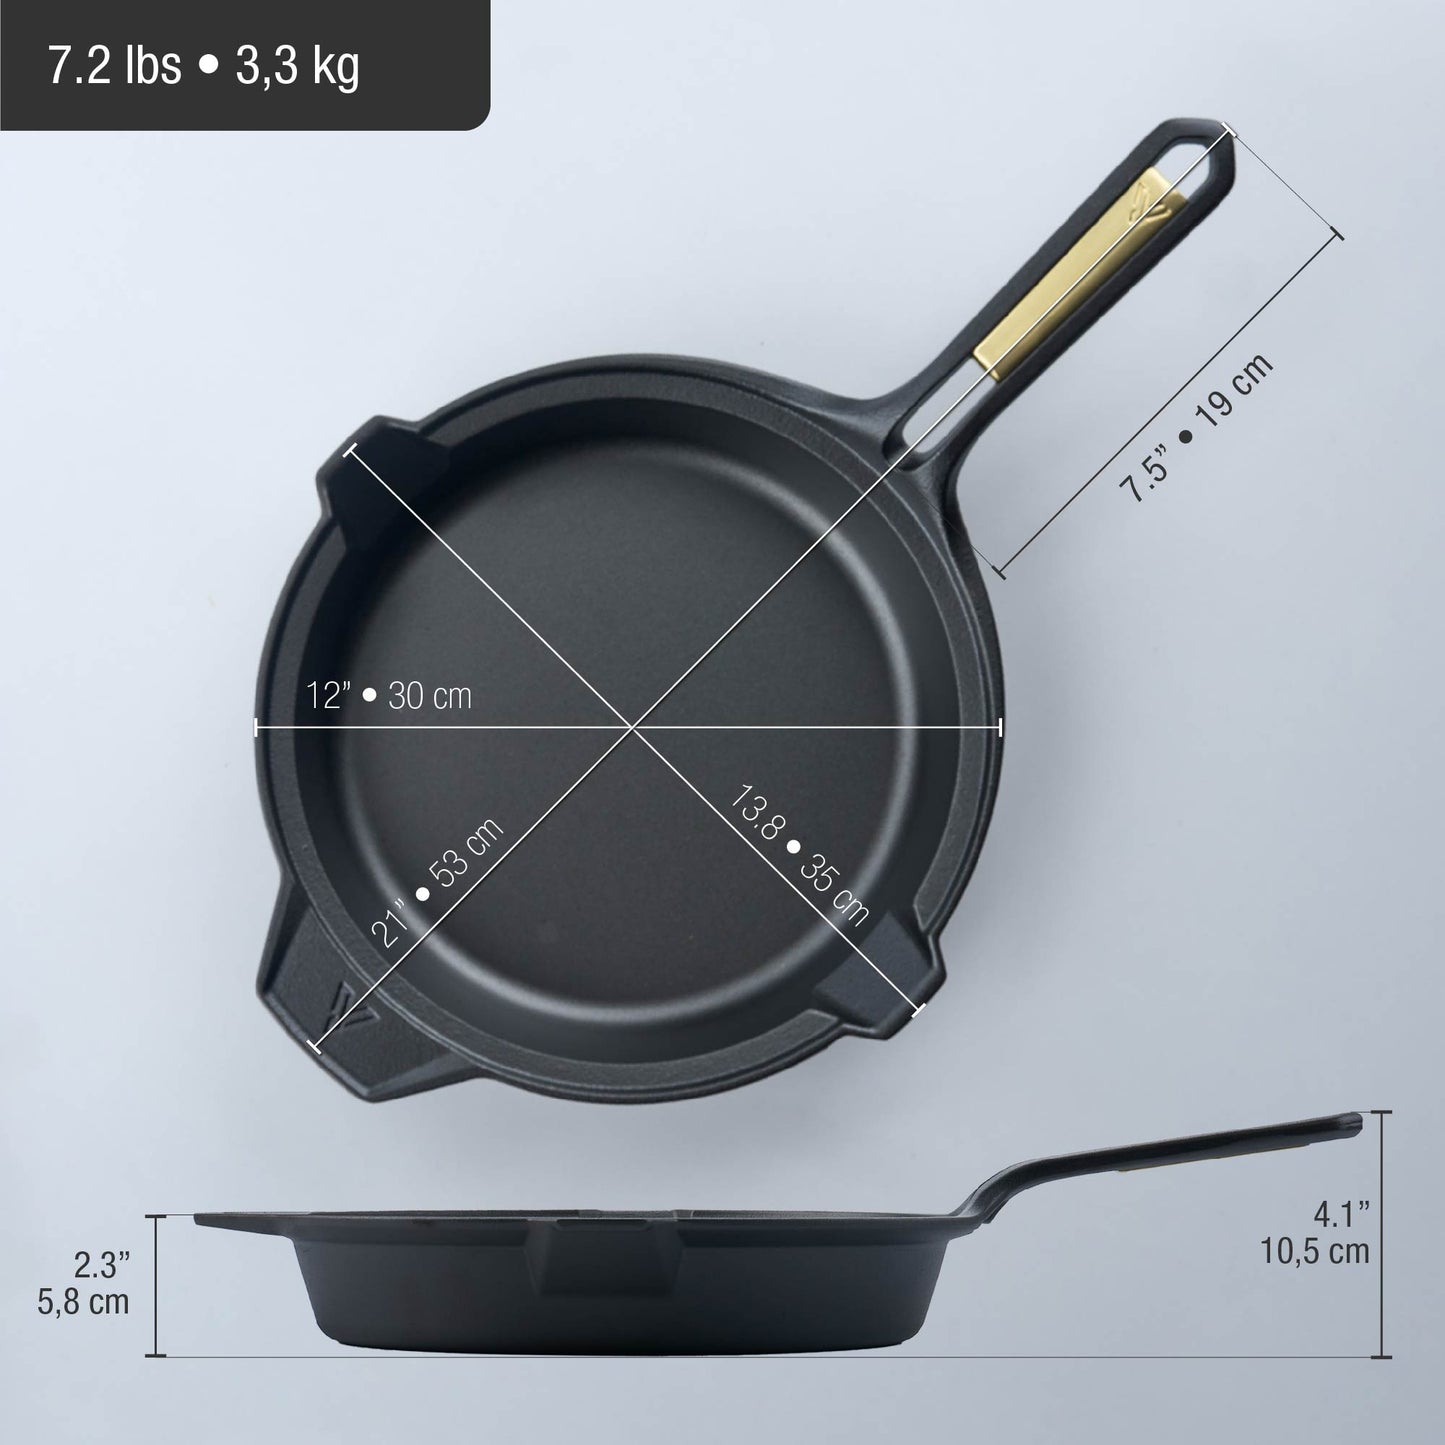  Victoria Cast-Iron Skillet, Pre-Seasoned Cast-Iron Frying Pan  with Long Handle, Made in Colombia, 12 Inch & Glass Lid for 12 Inch Cast  Iron Skillet, Frying Pan Lid with Stainless Steel Air